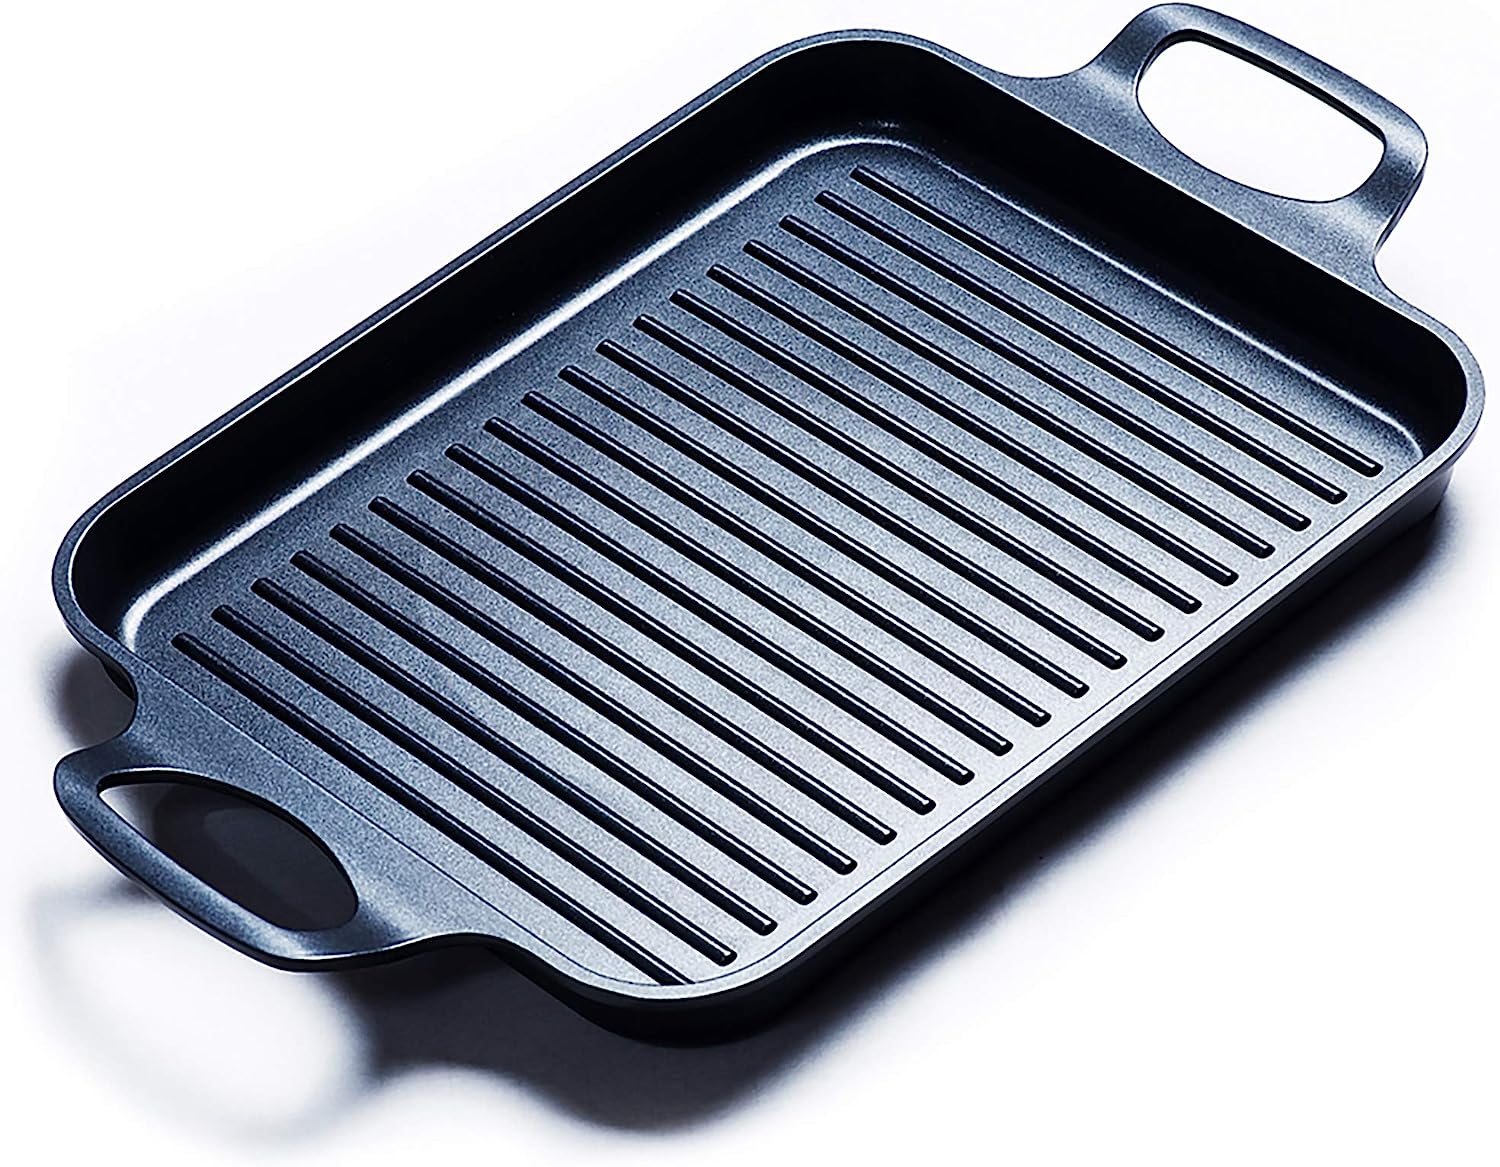 S·KITCHN Nonstick Grill Pan, Induction Stove Top Grill [...]